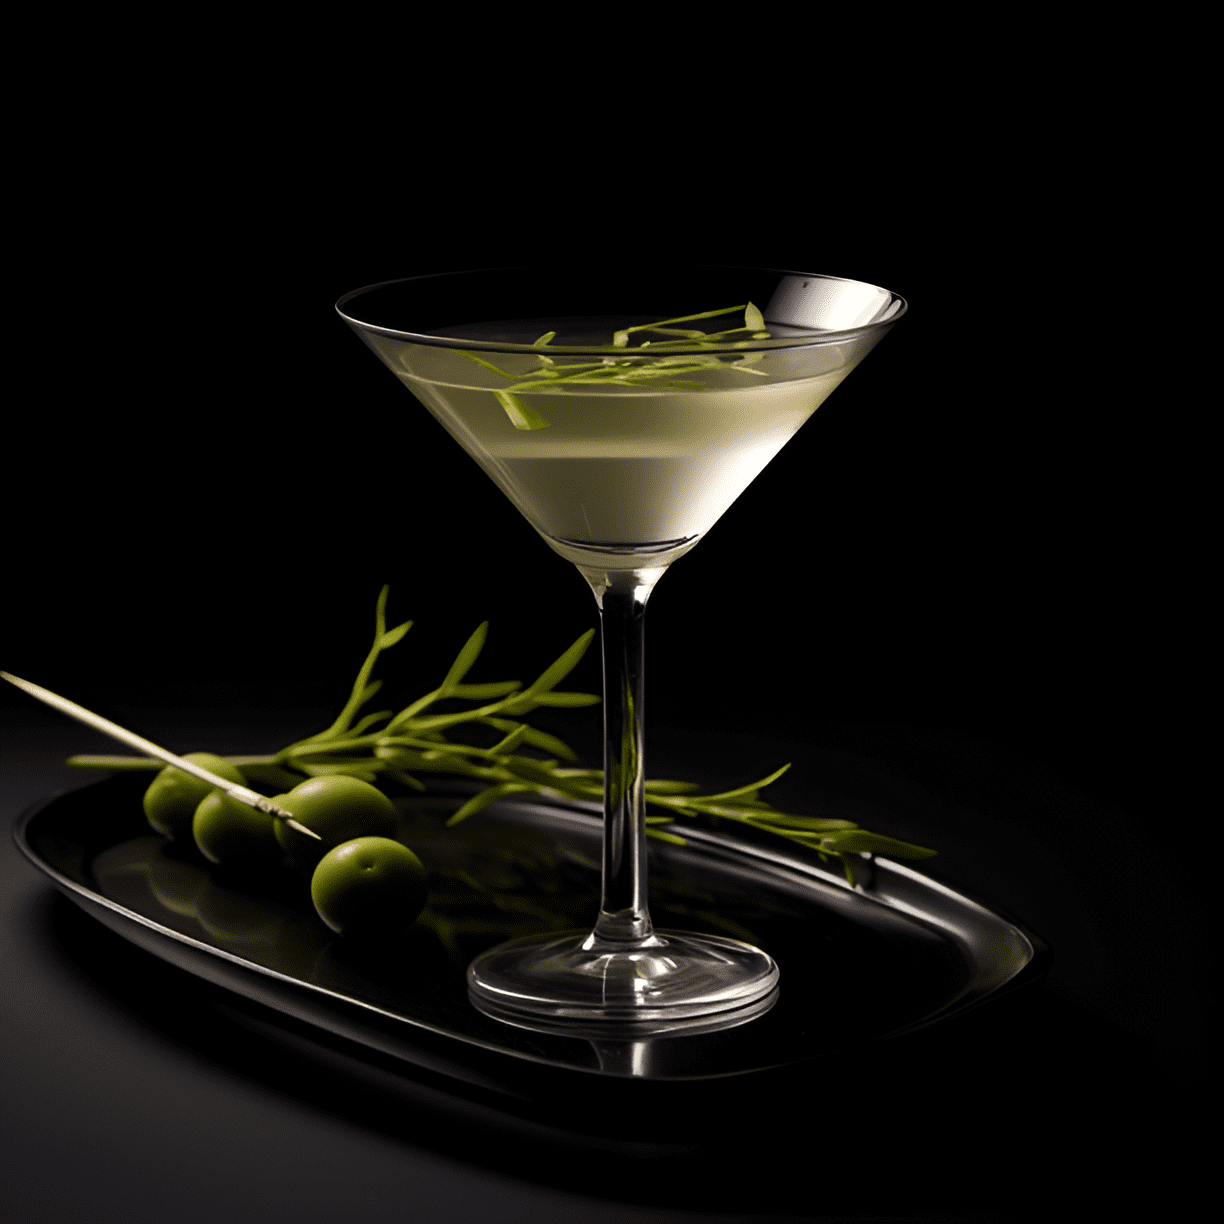 Sake Martini Cocktail Recipe - The Sake Martini is a delicate, smooth, and slightly floral cocktail with a hint of sweetness. It is light and refreshing, with a subtle hint of umami from the sake.